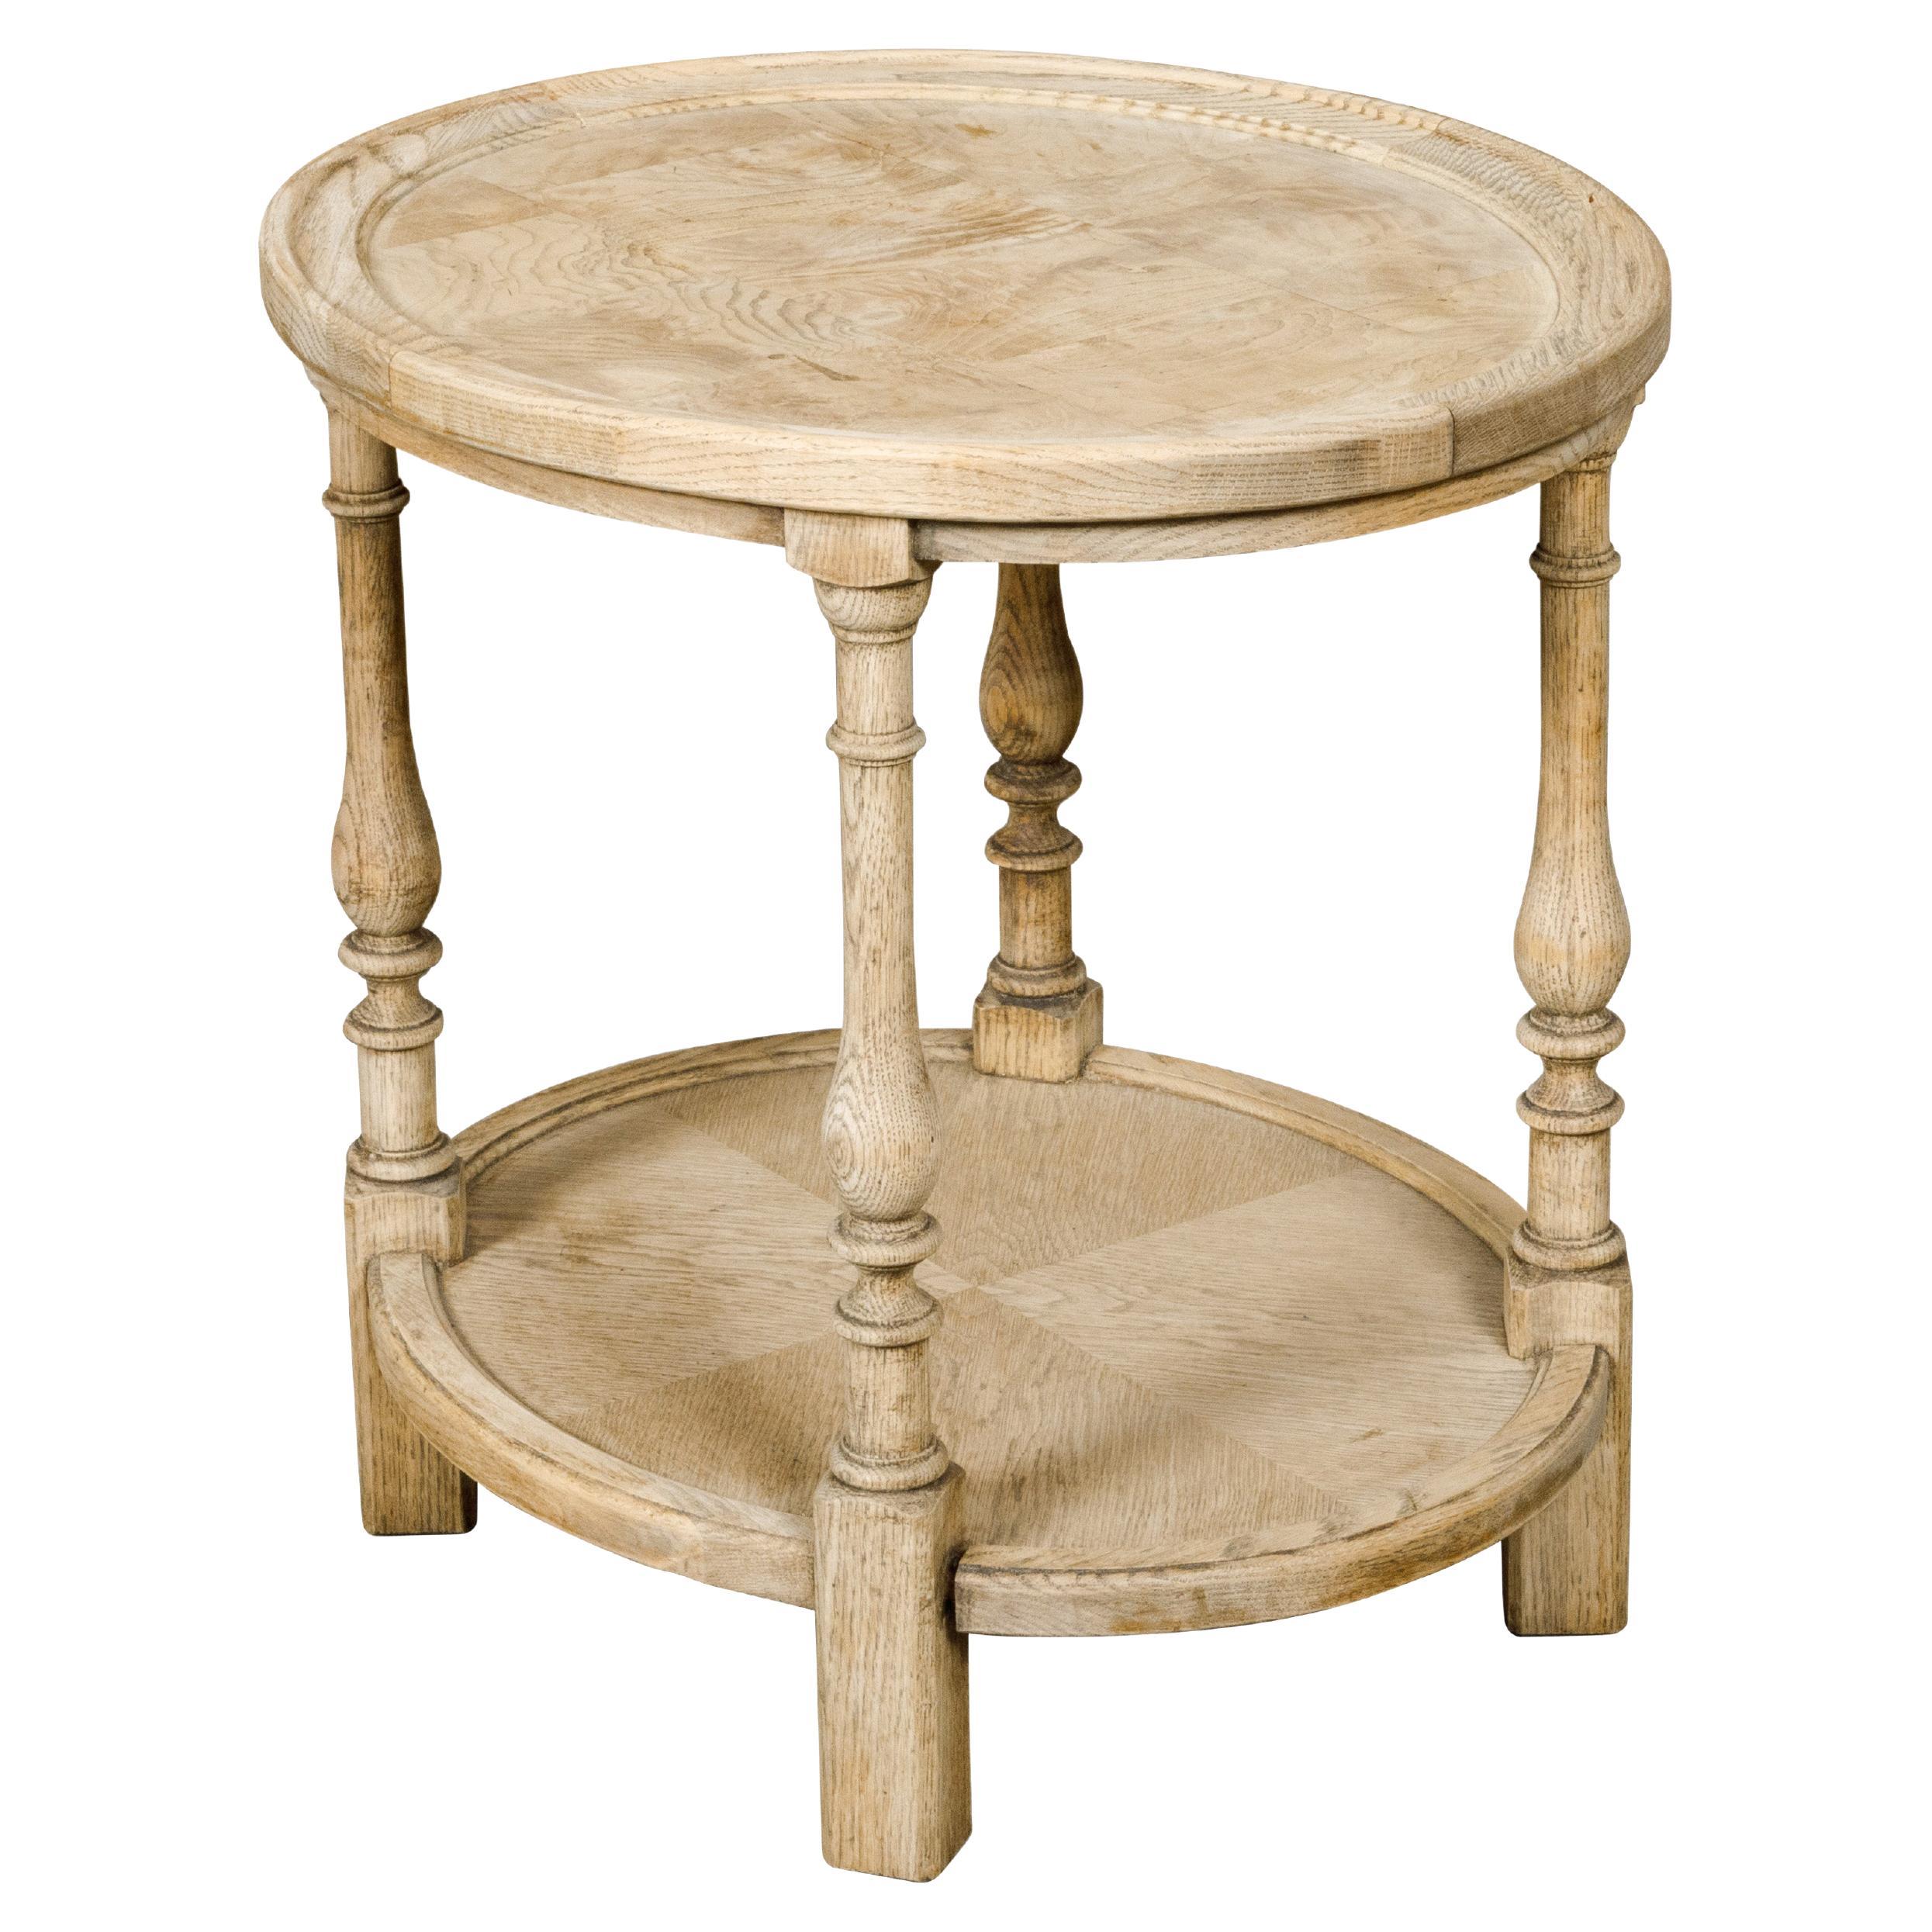 English 1900s Century Bleached Elmwood Tiered Side Table with Baluster Legs